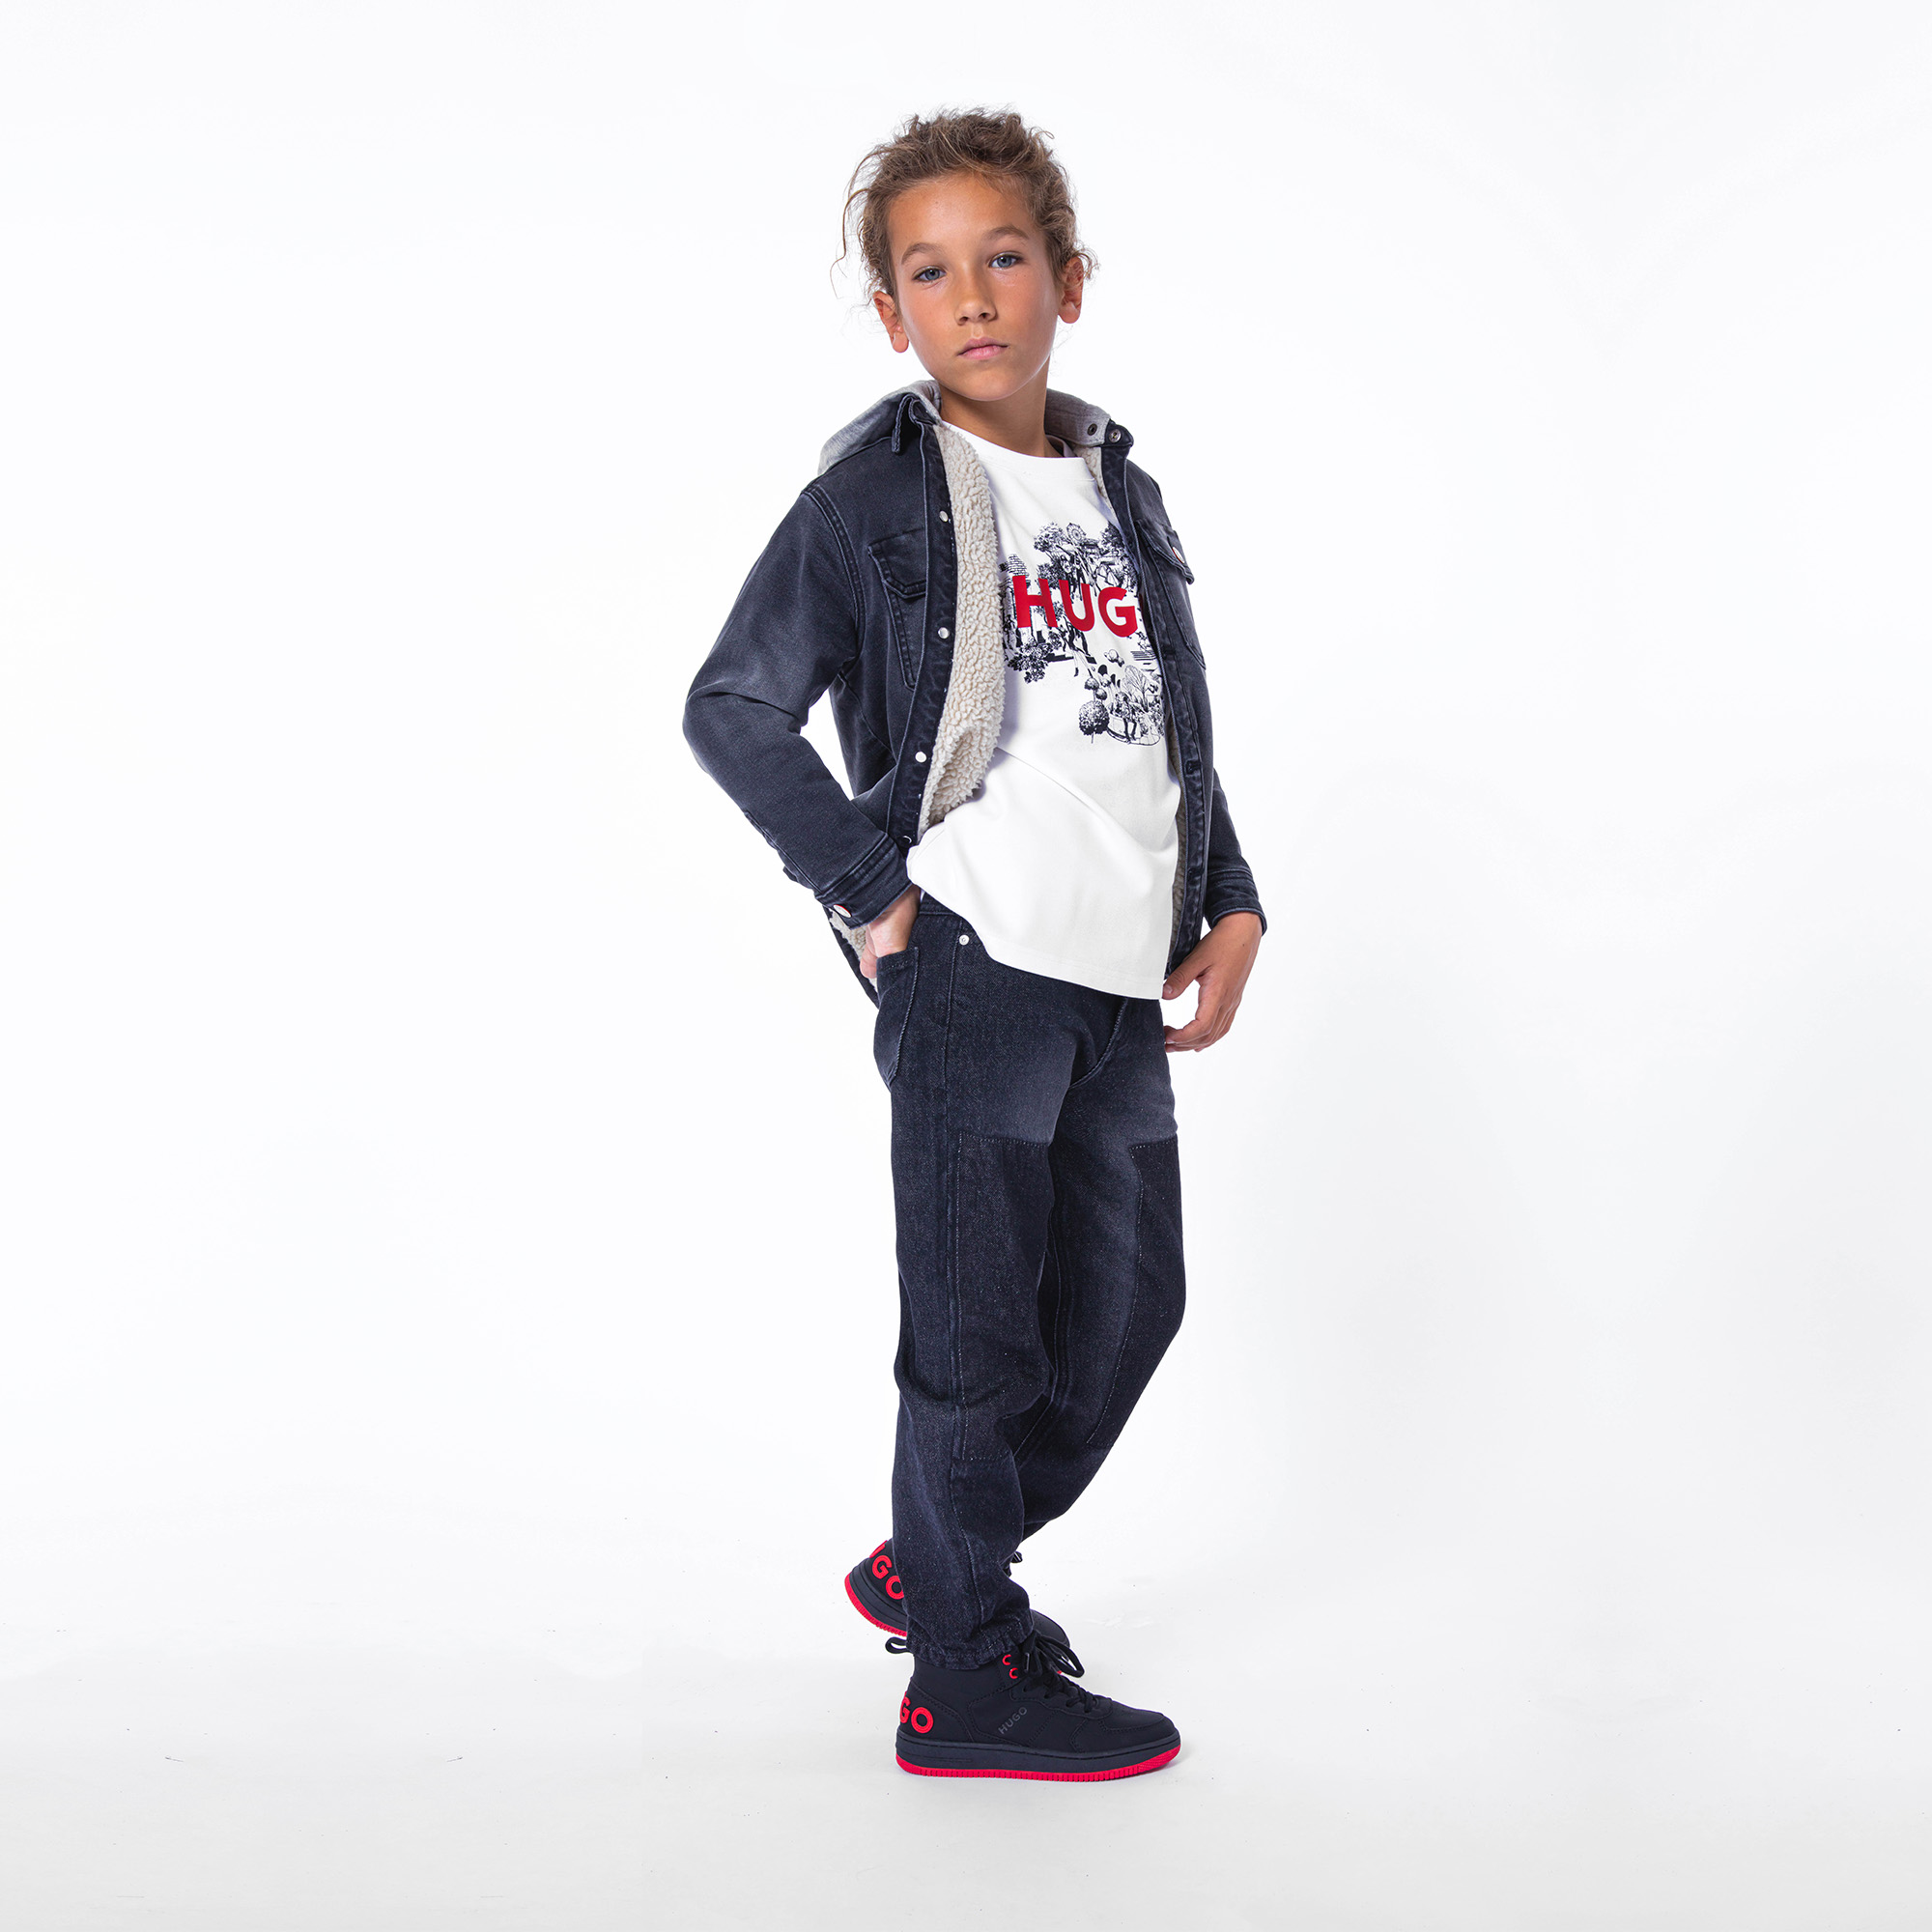 Loose-fit jeans with panels HUGO for BOY